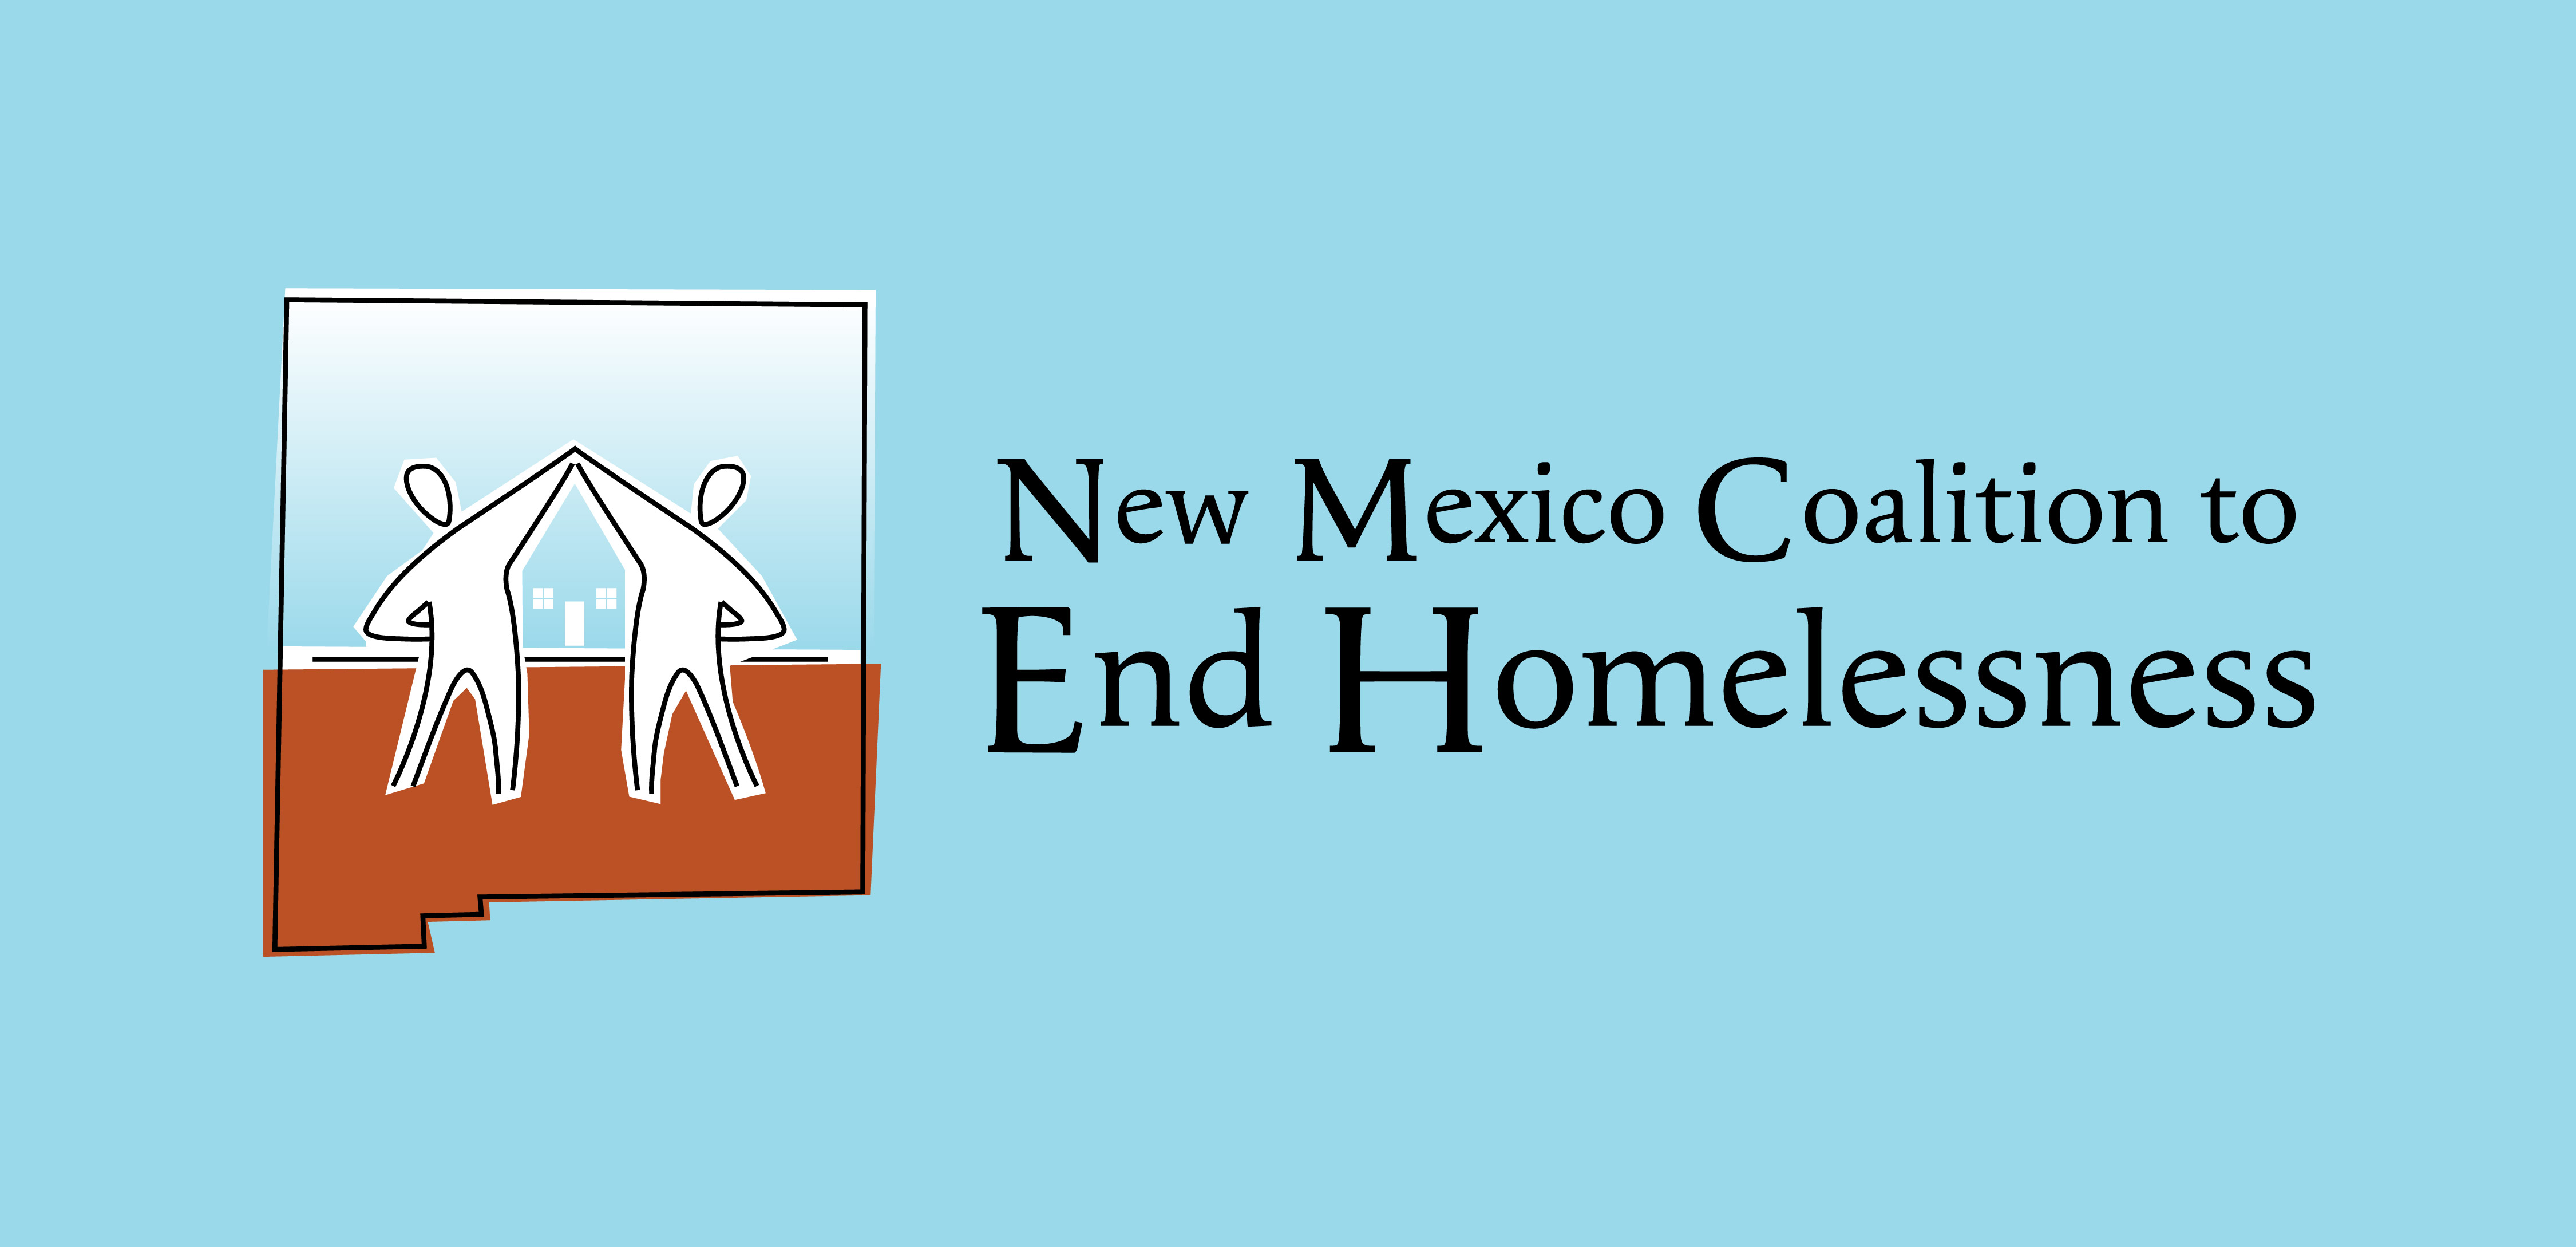 NM Coalition to End Homelessness